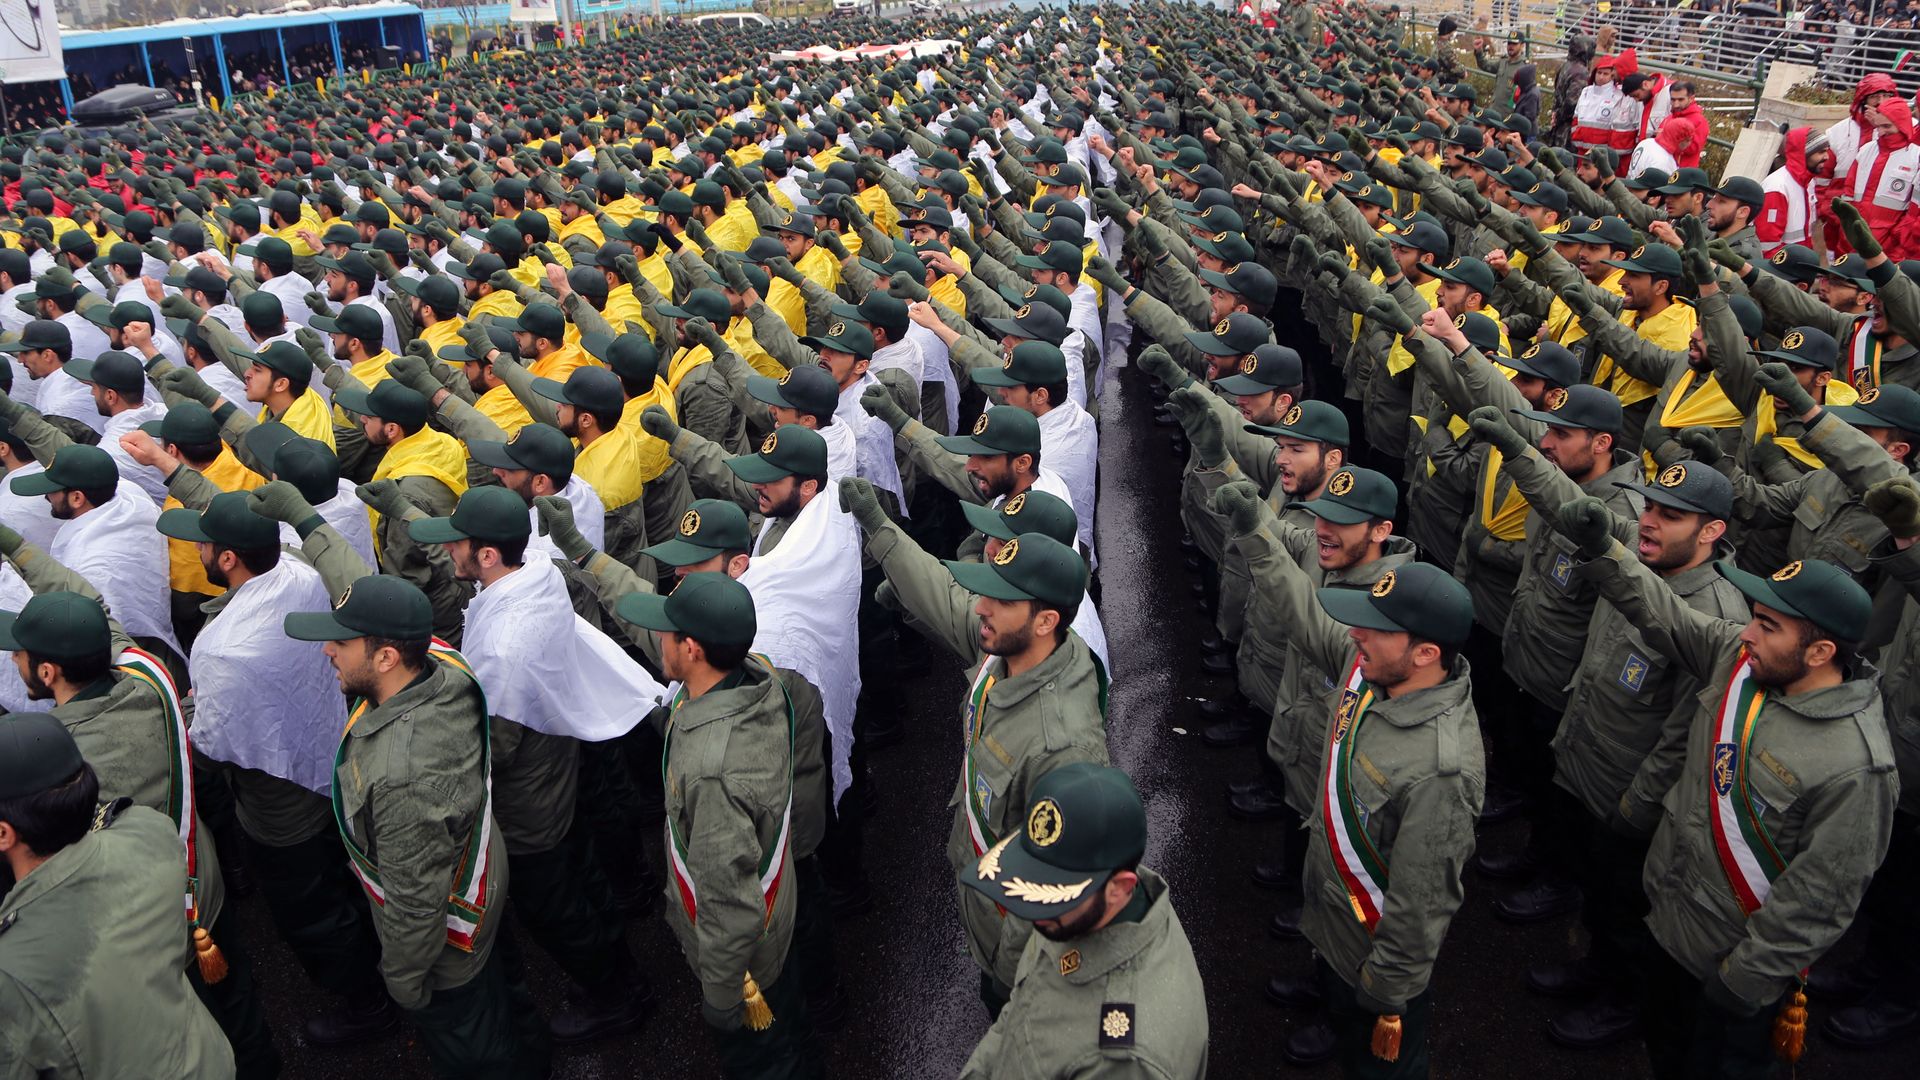 Members of Iran's Islamic Revolutionary Guard chant at a rally marking the 40th anniversary of Iran's Islamic Revolution held at Azadi Square in Tehran